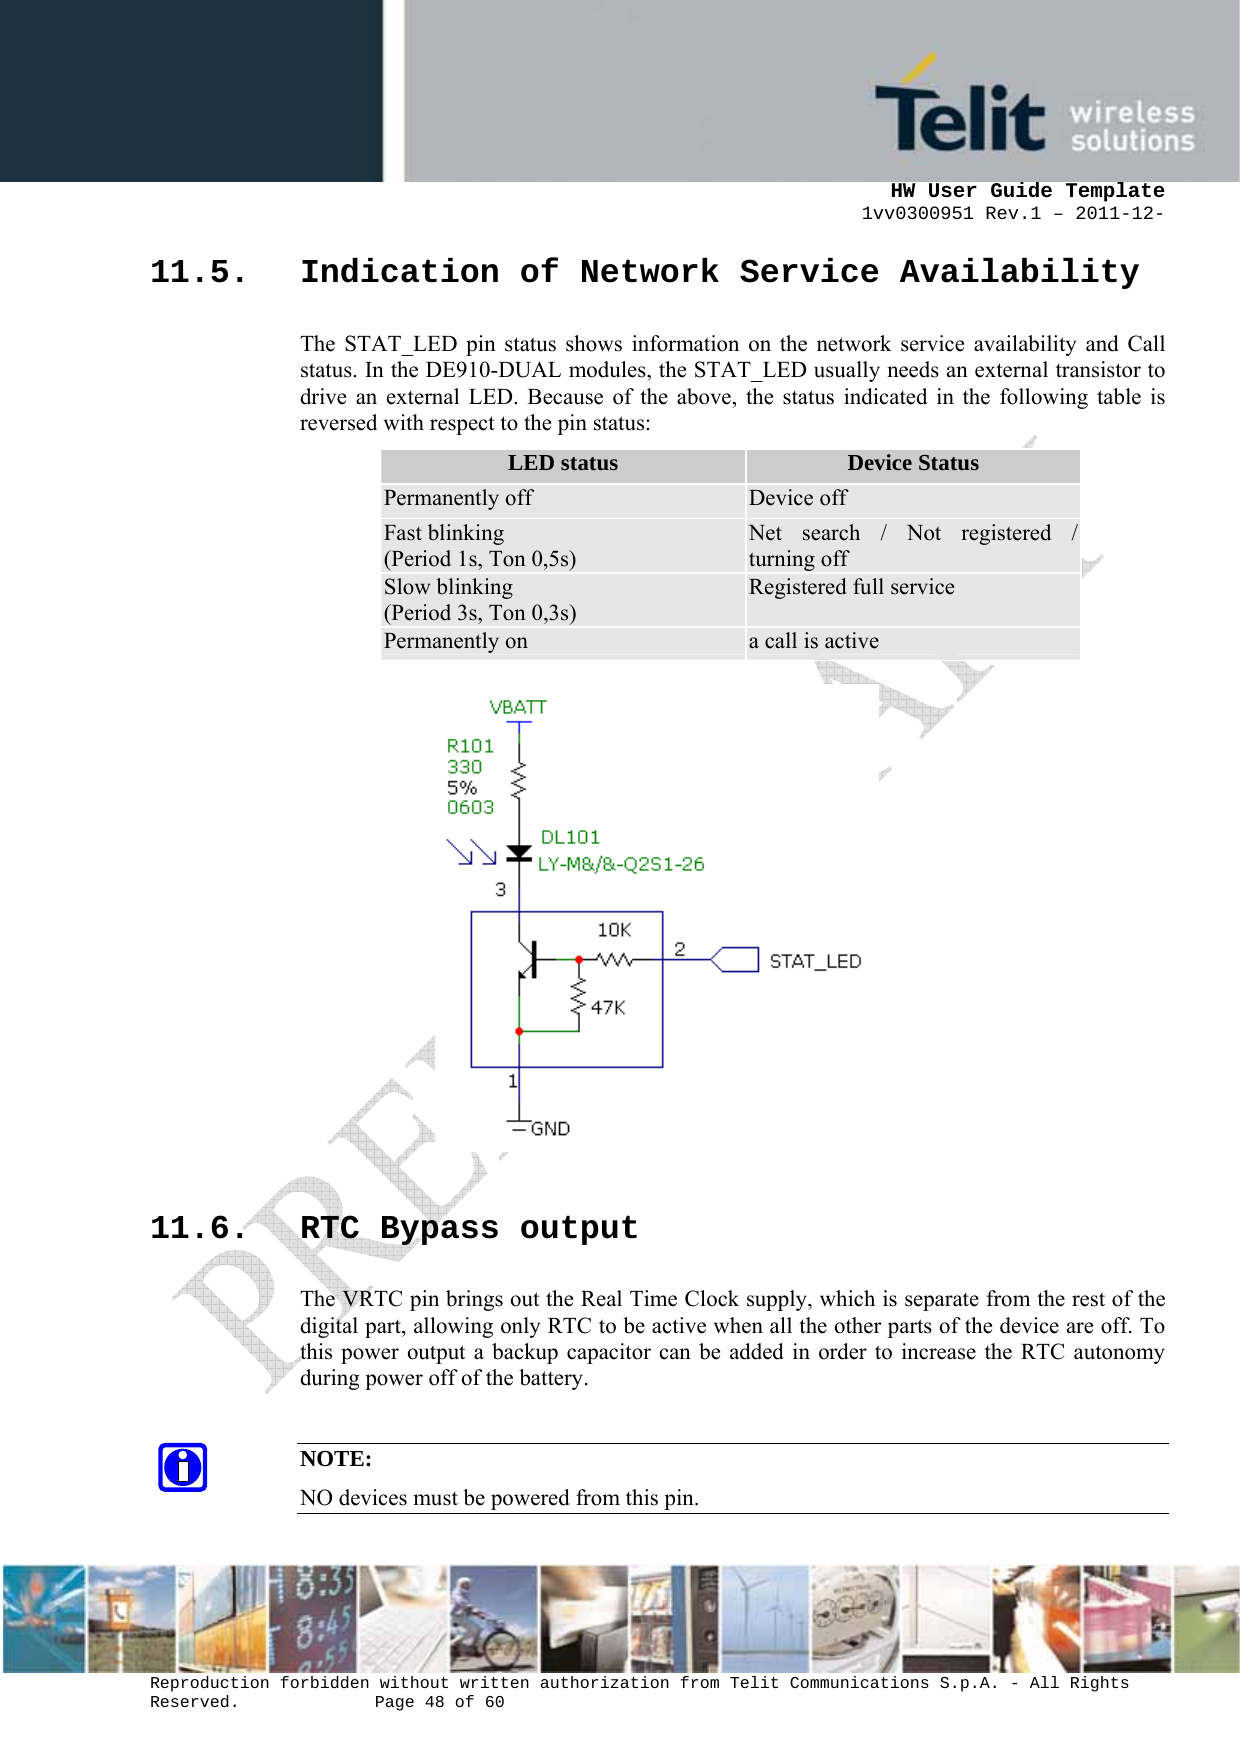      HW User Guide Template 1vv0300951 Rev.1 – 2011-12-  Reproduction forbidden without written authorization from Telit Communications S.p.A. - All Rights Reserved.    Page 48 of 60                                                     11.5. Indication of Network Service Availability The STAT_LED pin status shows information on the network service availability and Call status. In the DE910-DUAL modules, the STAT_LED usually needs an external transistor to drive an external LED. Because of the above, the status indicated in the following table is reversed with respect to the pin status: LED status  Device Status Permanently off  Device off Fast blinking (Period 1s, Ton 0,5s) Net search / Not registered / turning off Slow blinking (Period 3s, Ton 0,3s) Registered full service Permanently on  a call is active                   11.6. RTC Bypass output The VRTC pin brings out the Real Time Clock supply, which is separate from the rest of the digital part, allowing only RTC to be active when all the other parts of the device are off. To this power output a backup capacitor can be added in order to increase the RTC autonomy during power off of the battery.   NOTE: NO devices must be powered from this pin.  